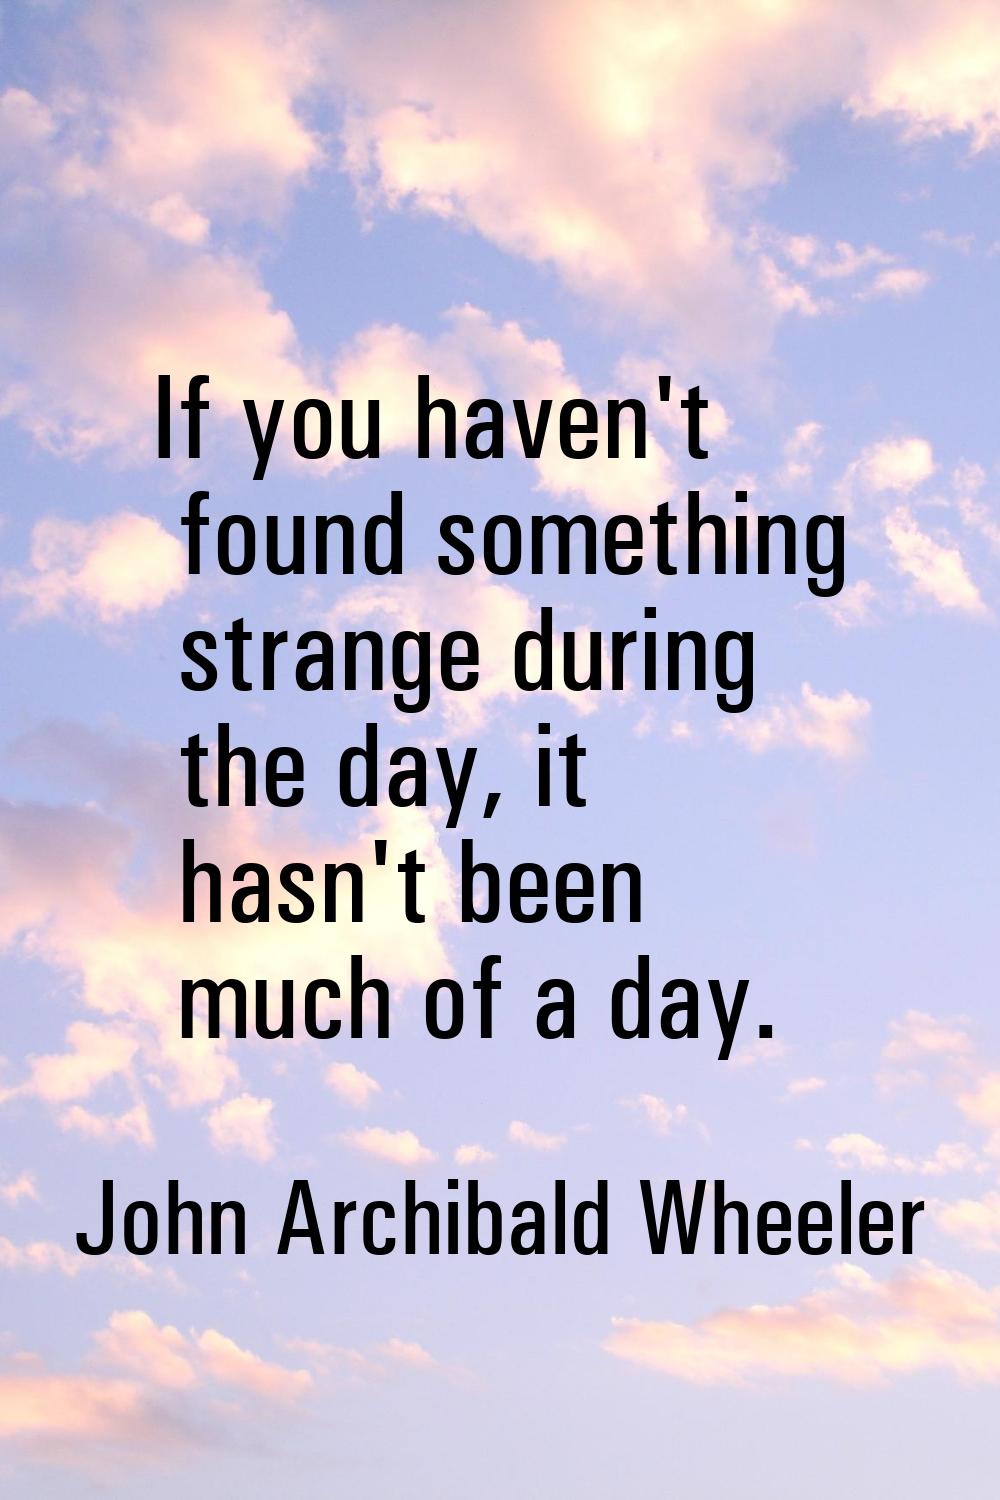 If you haven't found something strange during the day, it hasn't been much of a day.